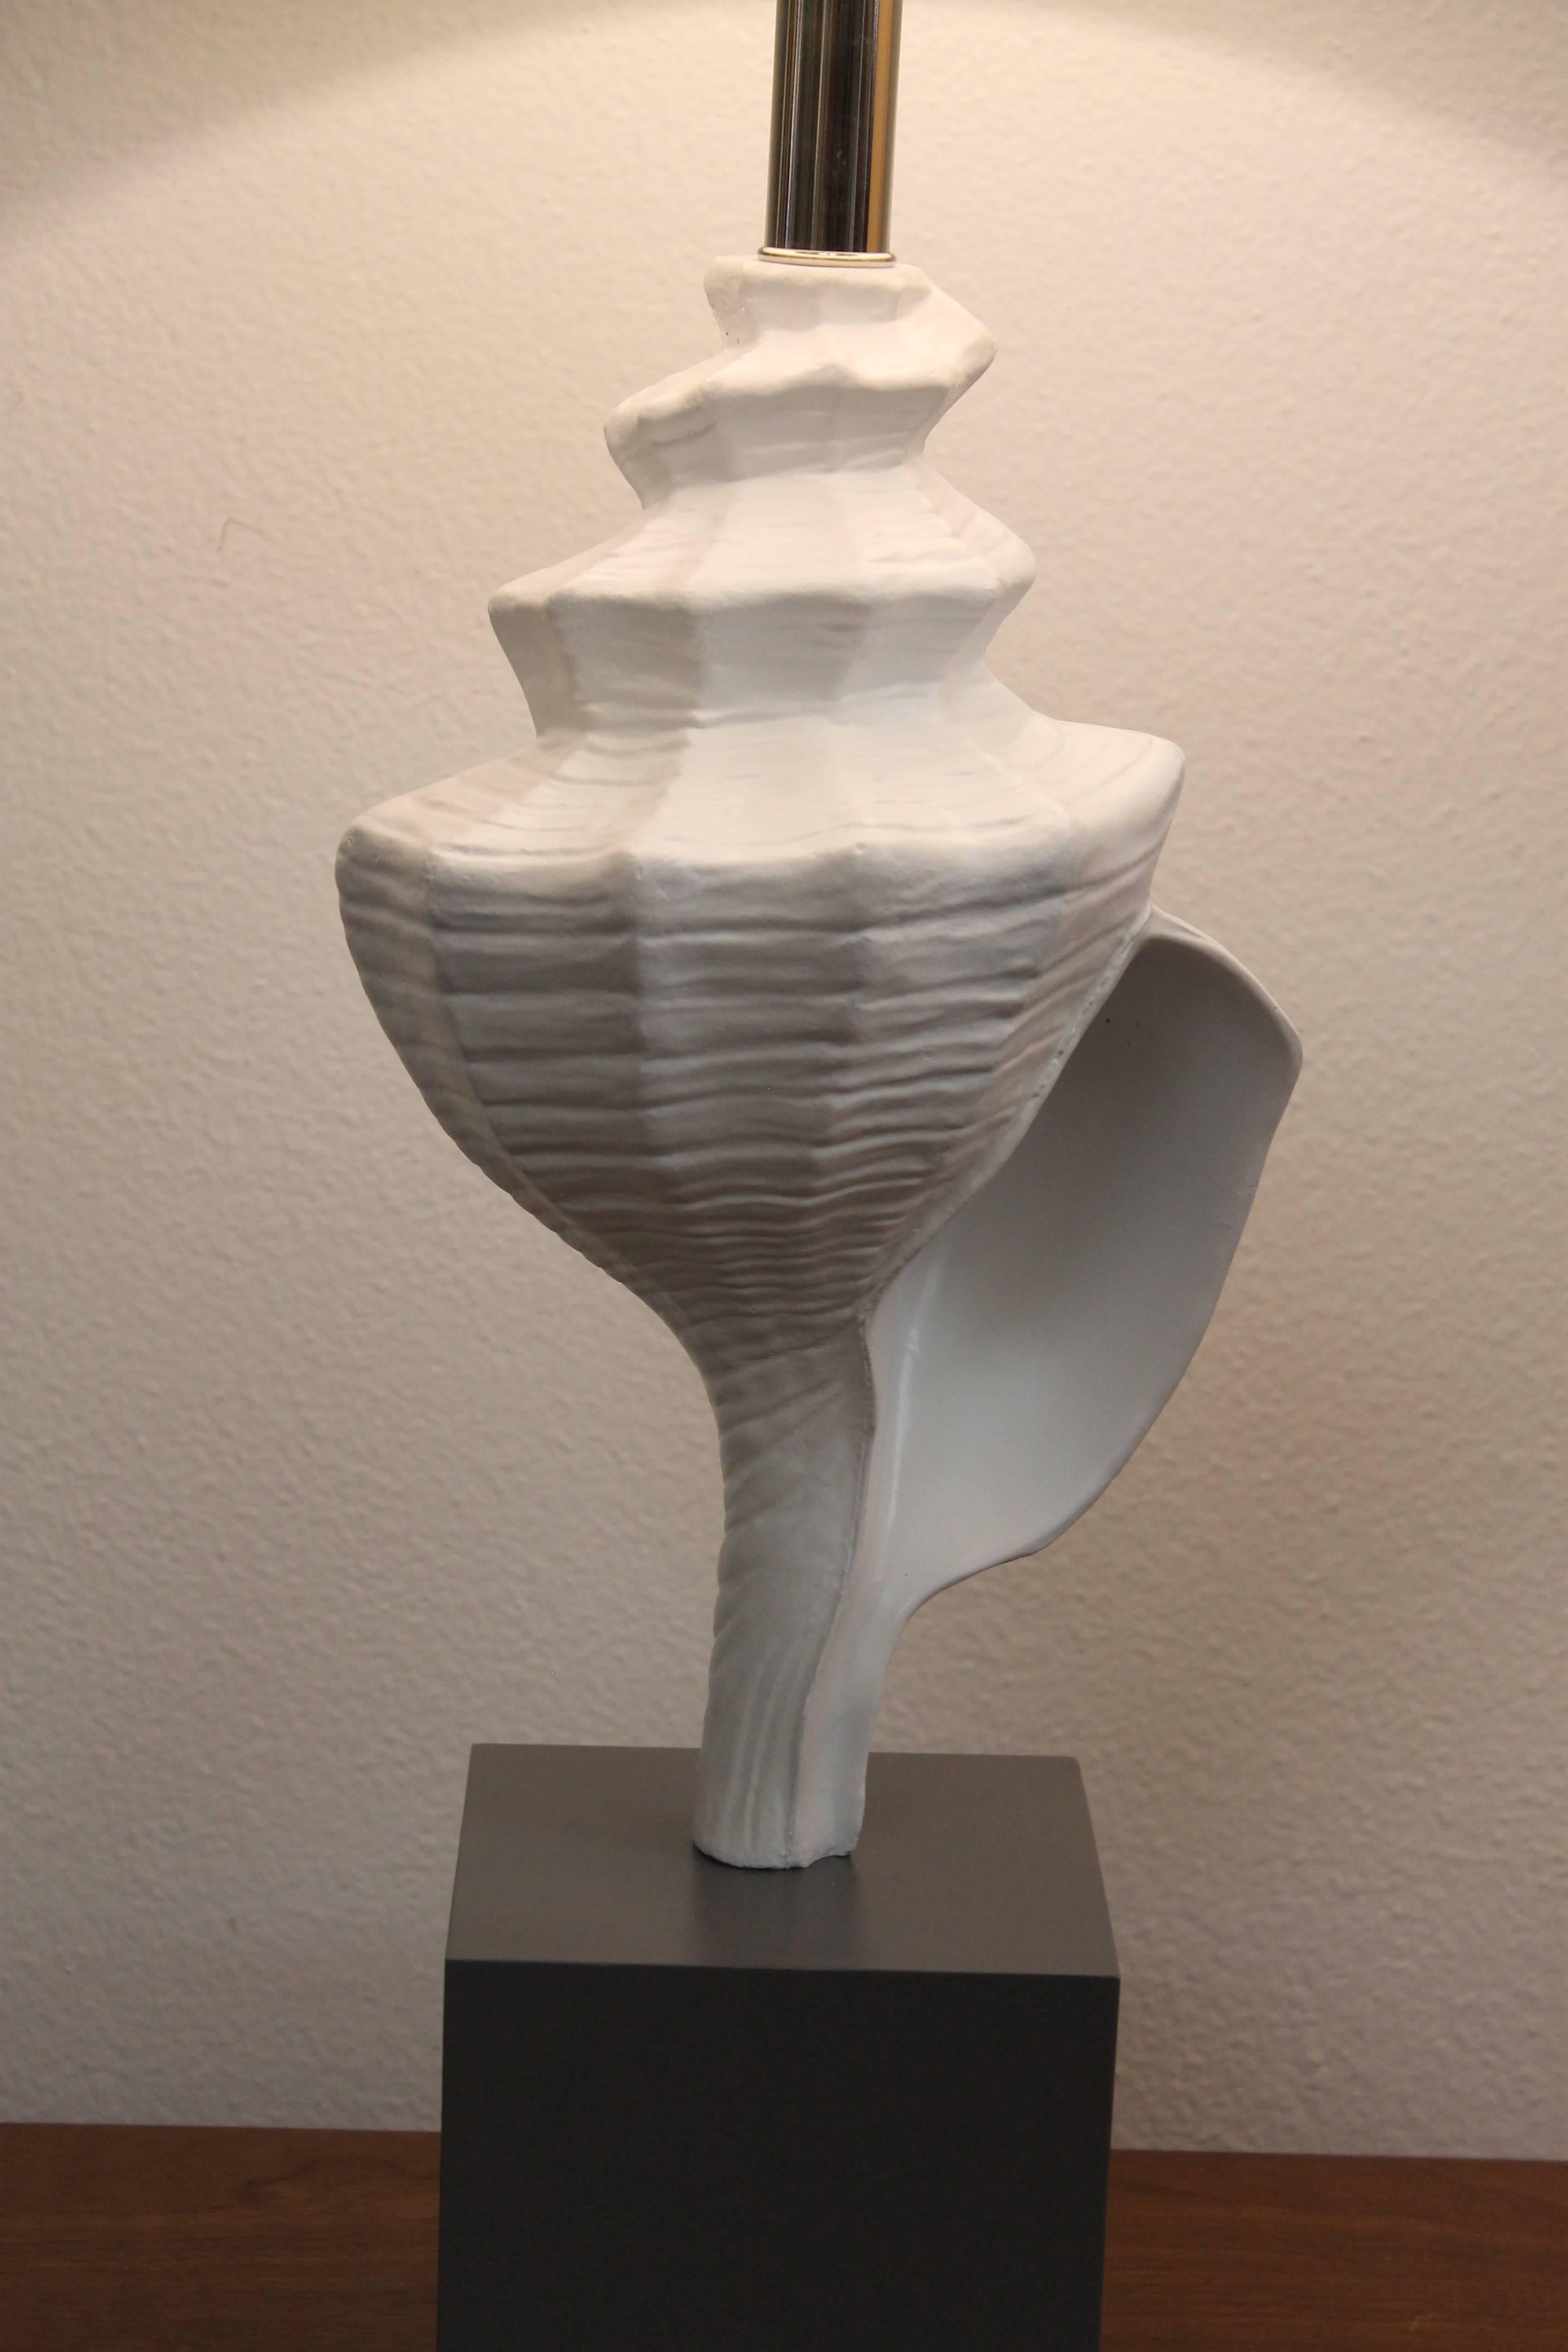 Aluminum seashell lamp attributed to the Laurel Lamp Company, Newark, New Jersey. The seashell is 13.25” high. Total height from base to the bottom of socket is 21.5”. Measure: Base is 5.5” wide, 5.5” deep and almost 5” high. Lamp has been